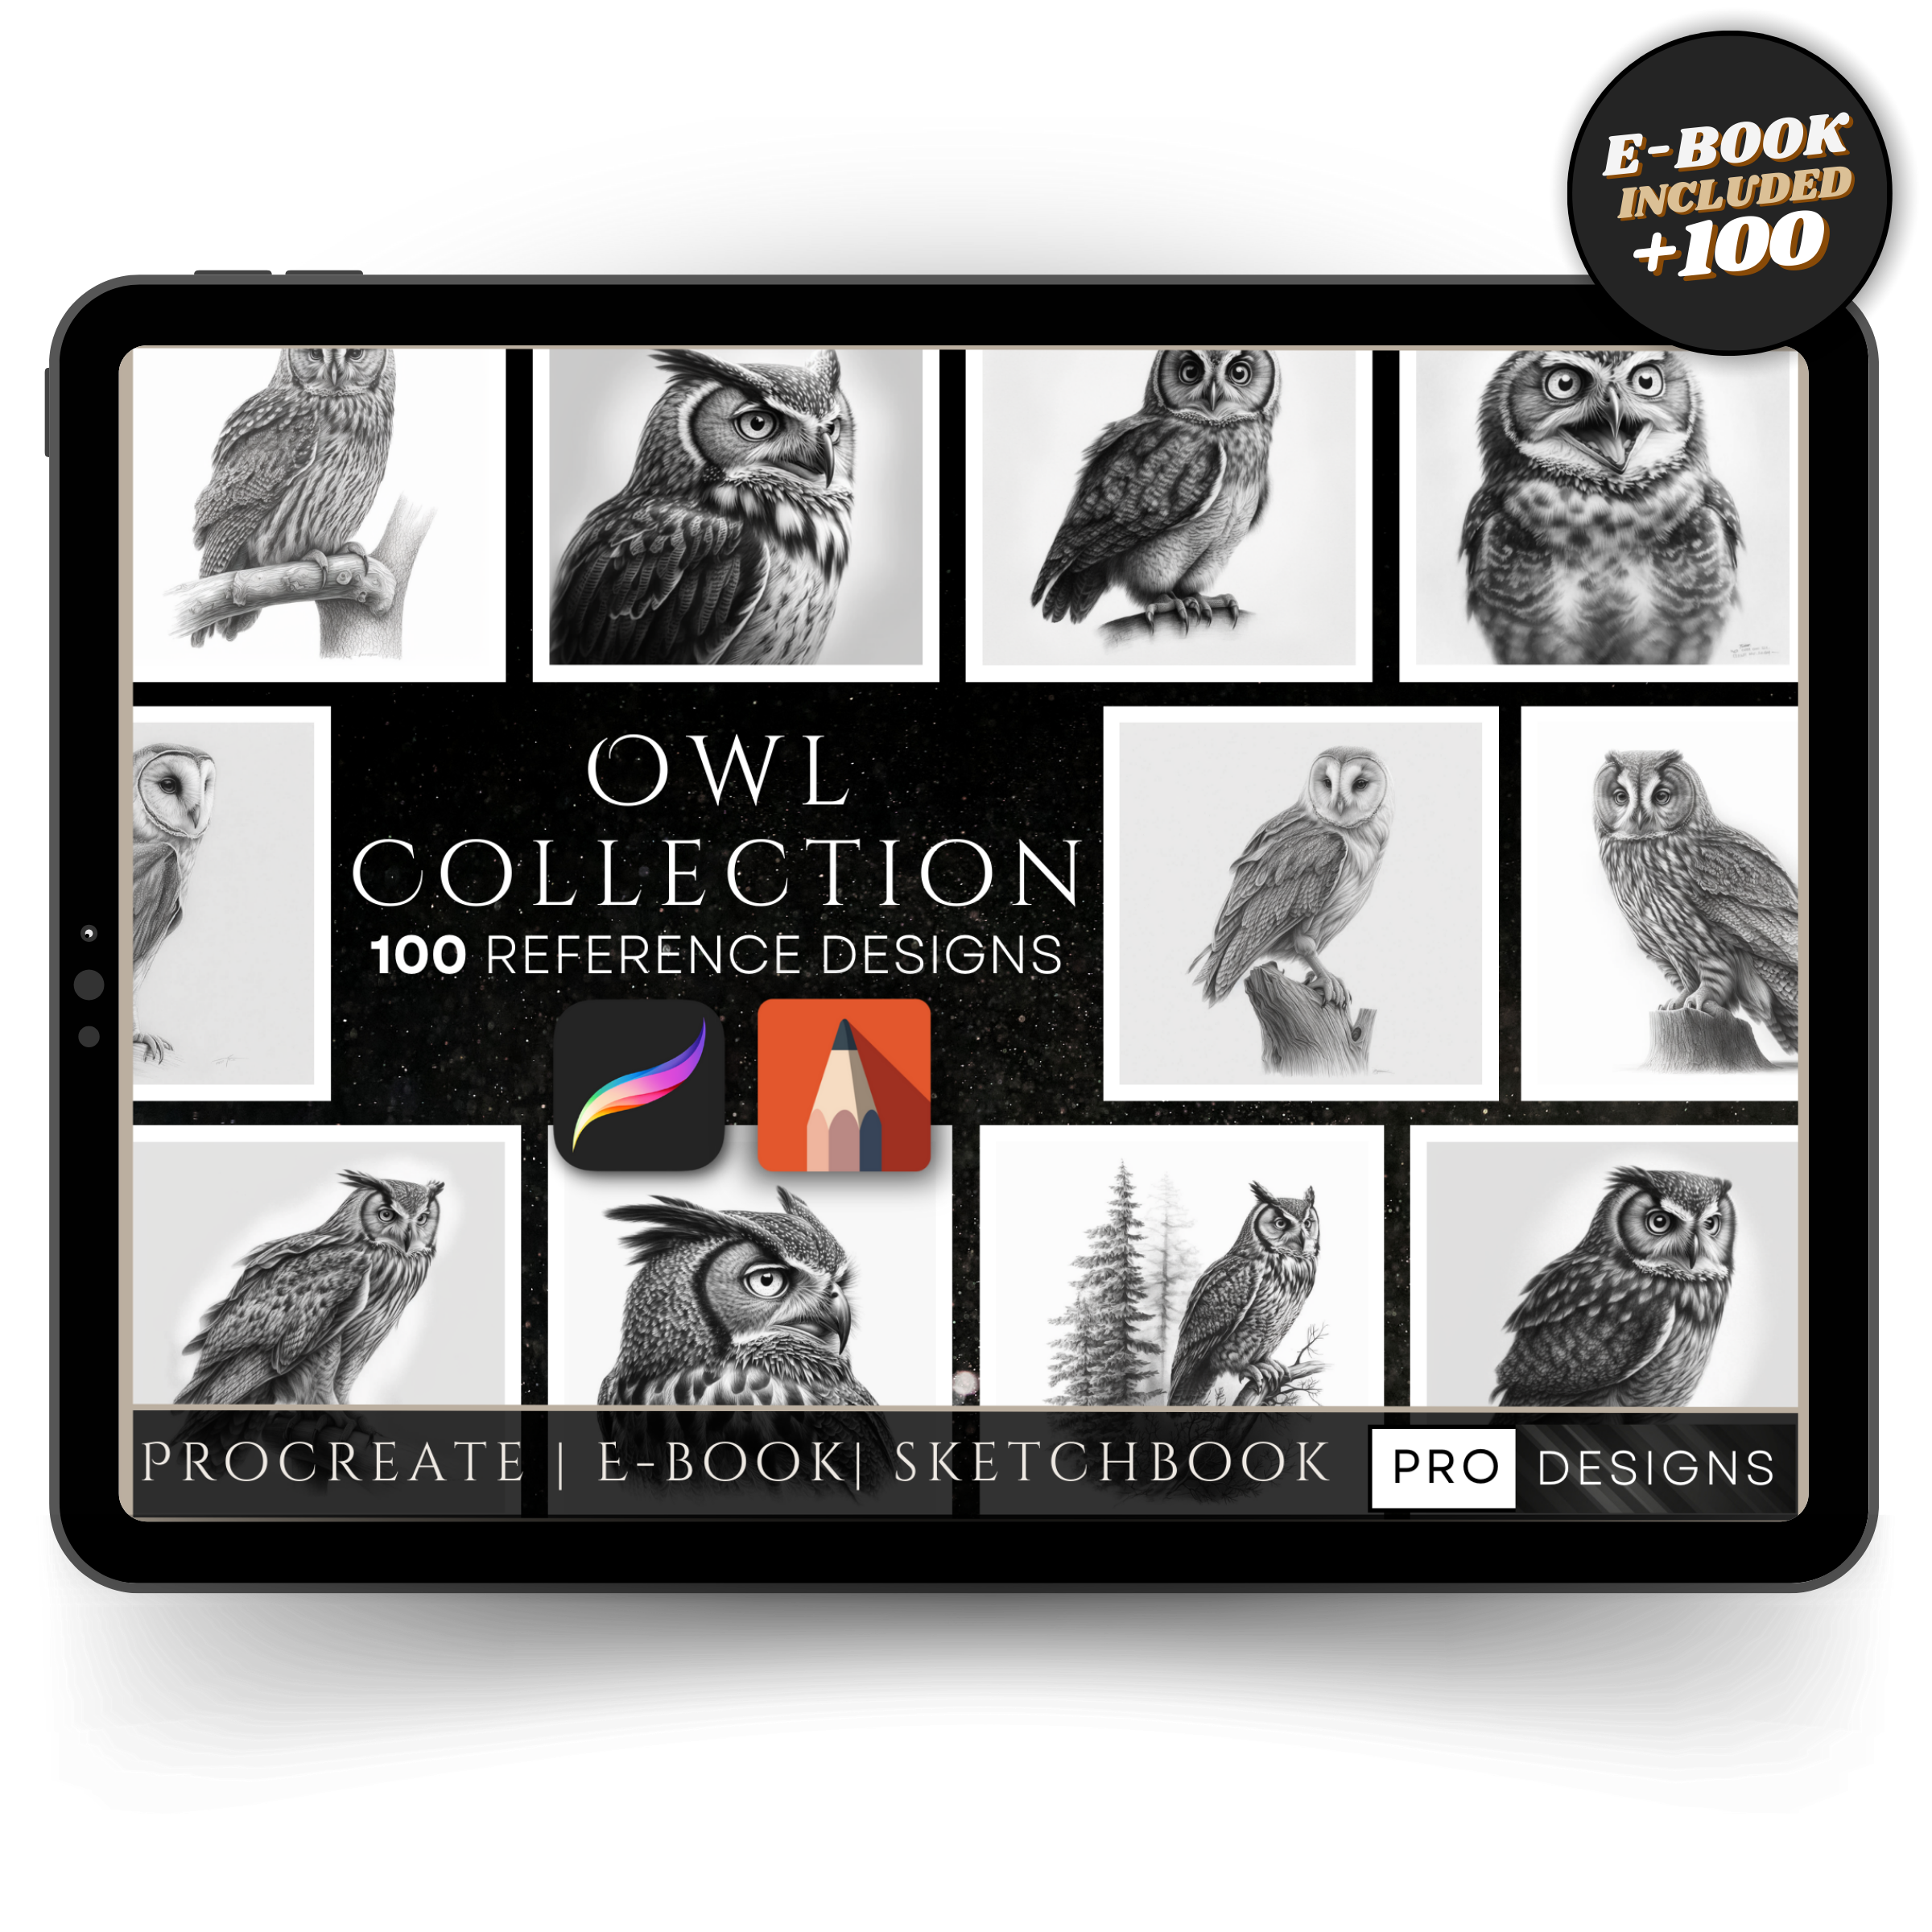 "Whispers of the Night" - The Owl Collection